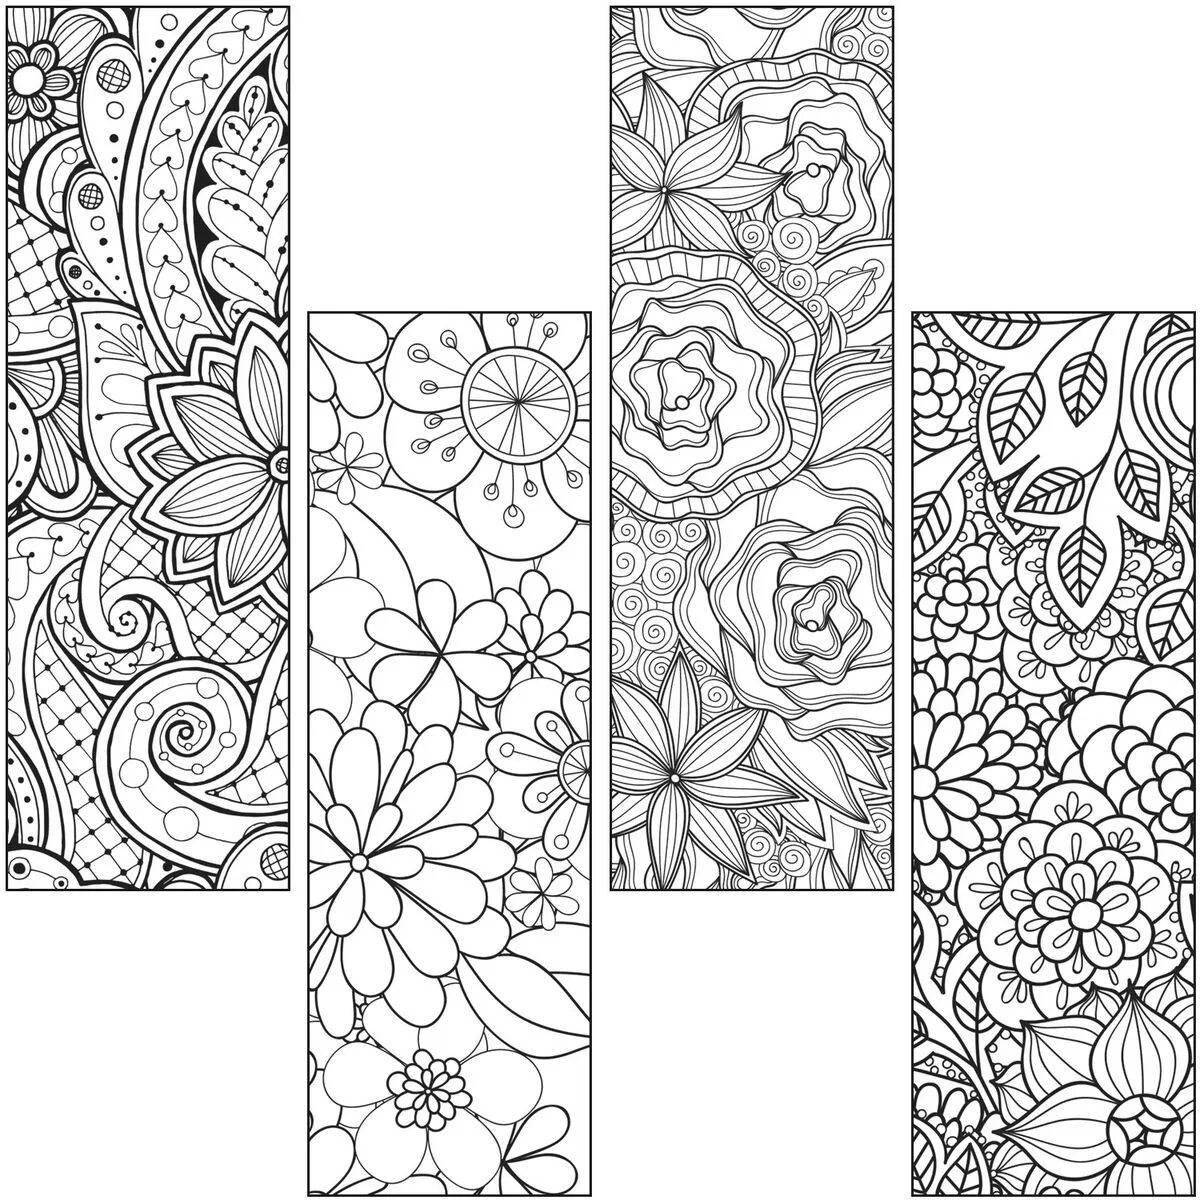 A wonderful coloring book for a personal diary